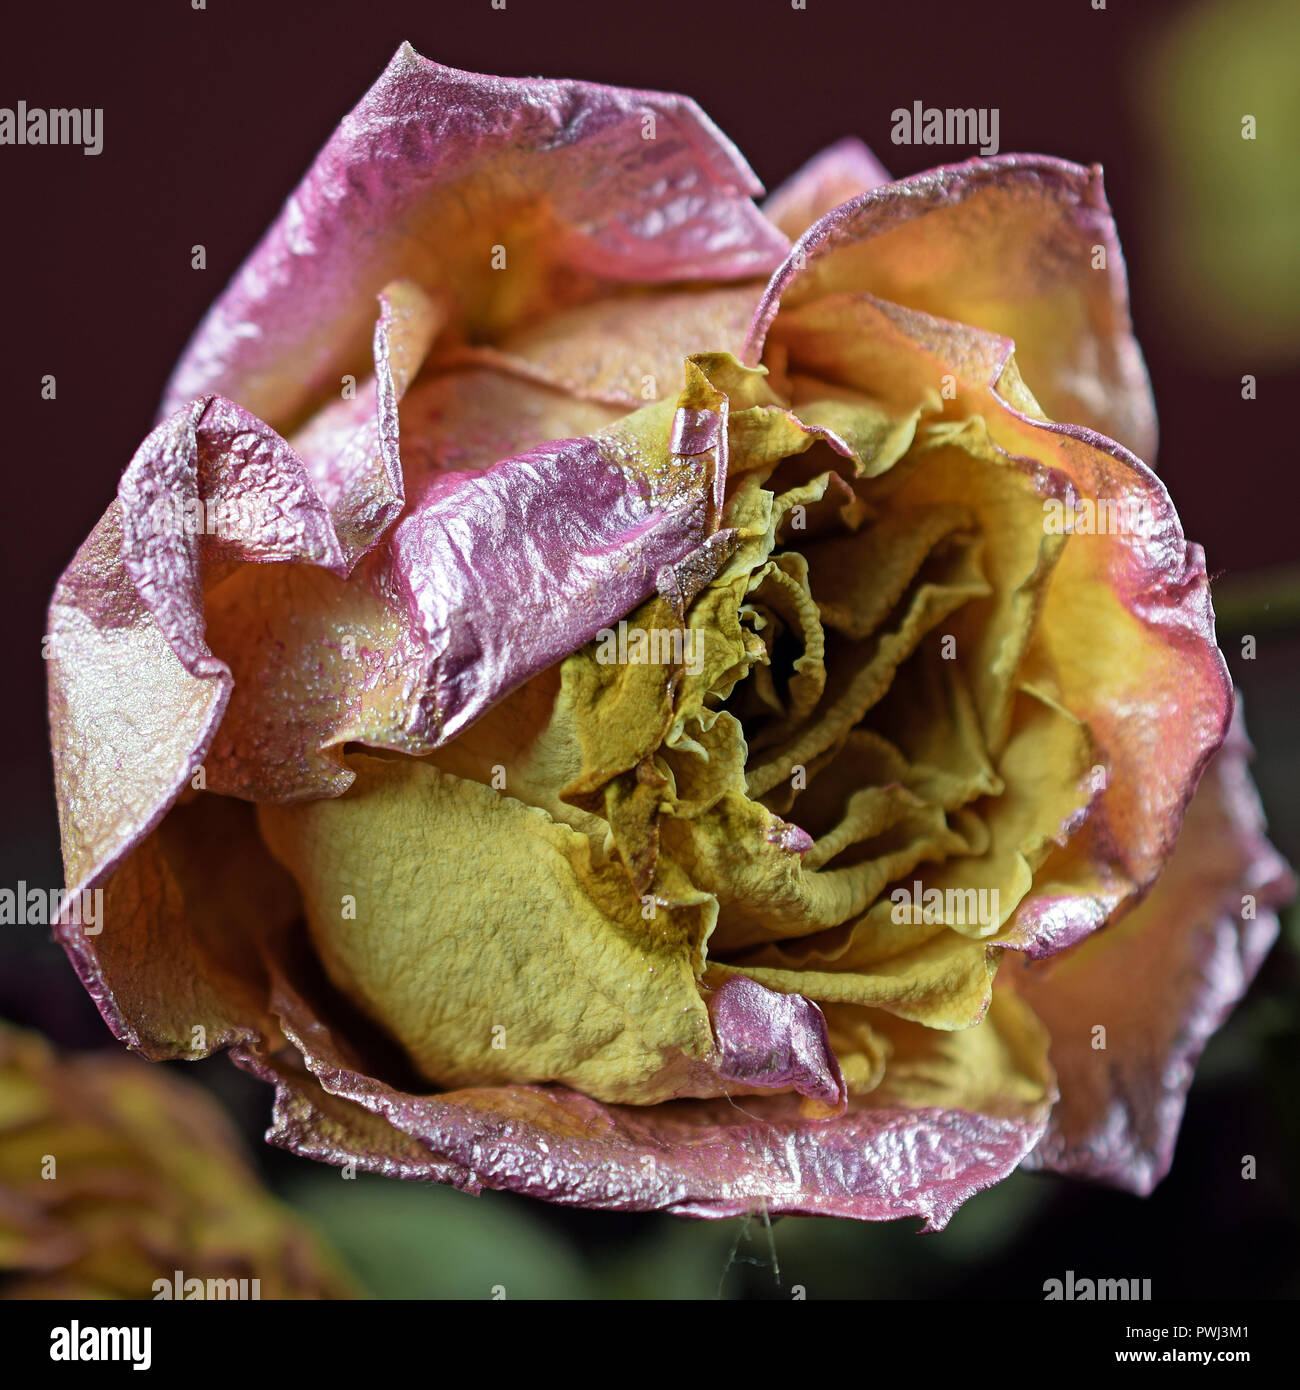 Withered dying pink yellow rose.  Square shape close up image. Stock Photo